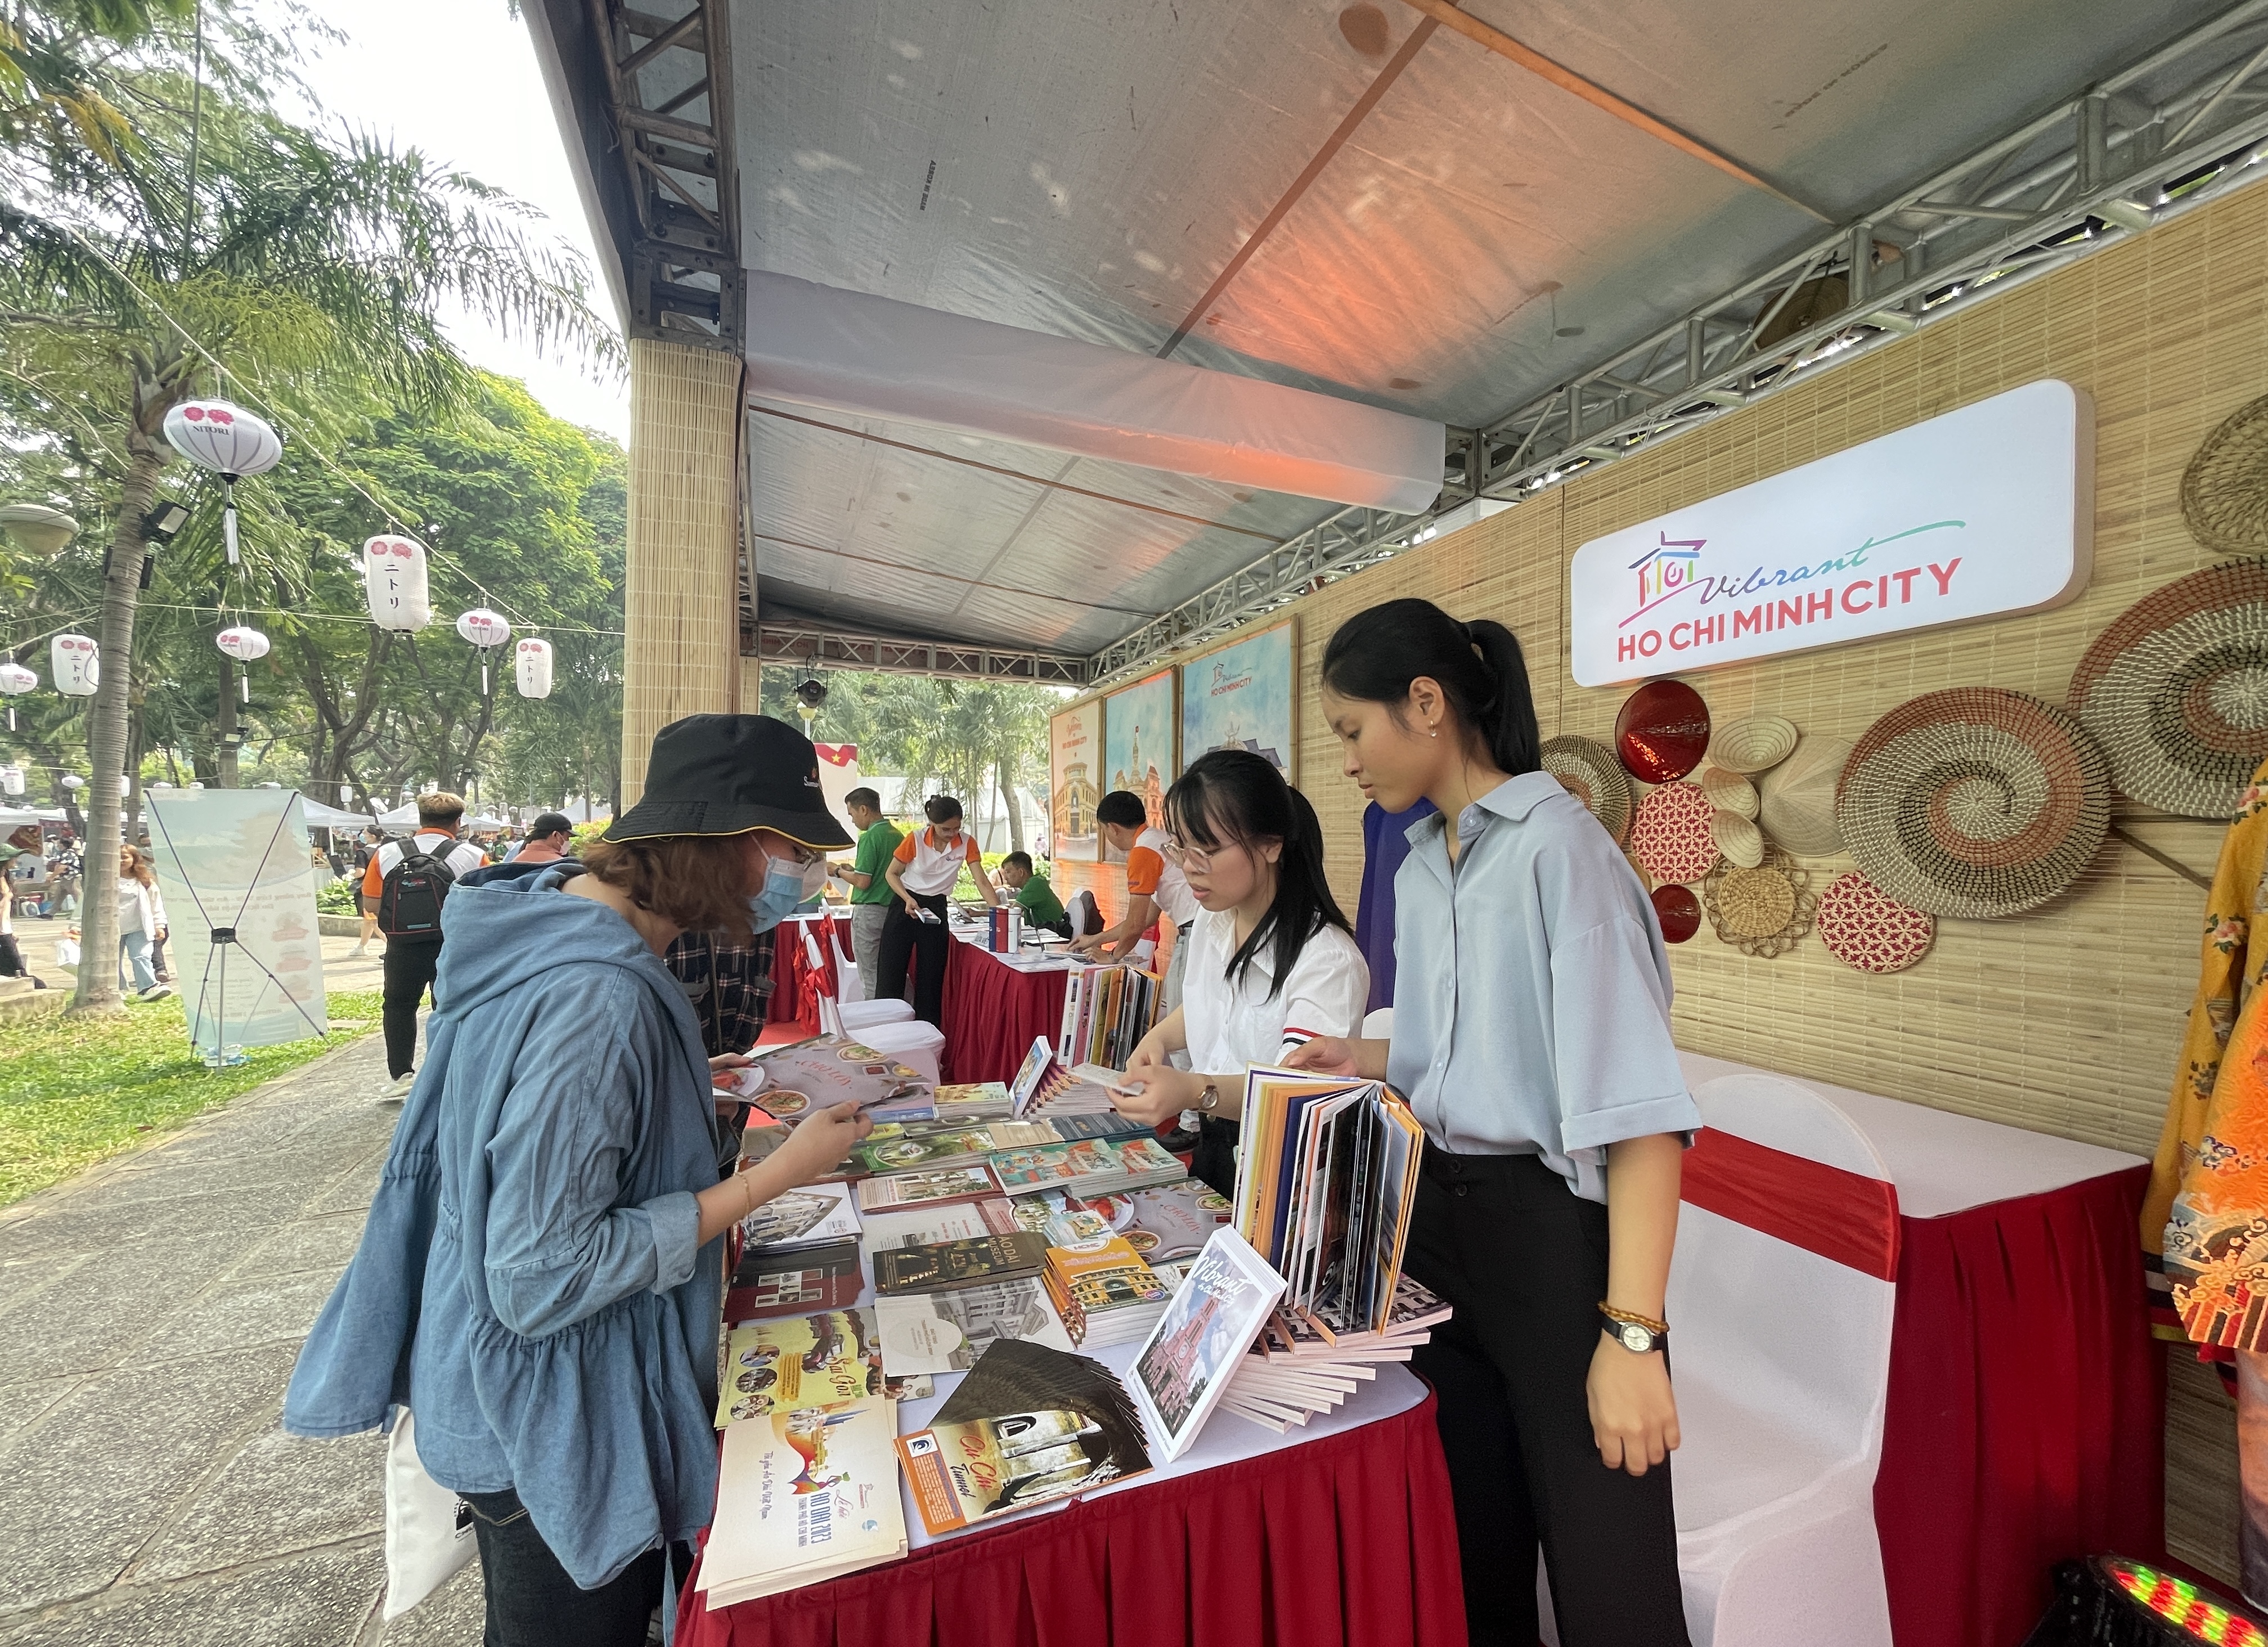 A visitor looks for information about Ho Chi Minh City tourism’s products at a booth at the Japan Vietnam Festival in Ho Chi Minh City on February 25, 2023. Photo: Dong Nguyen / Tuoi Tre News